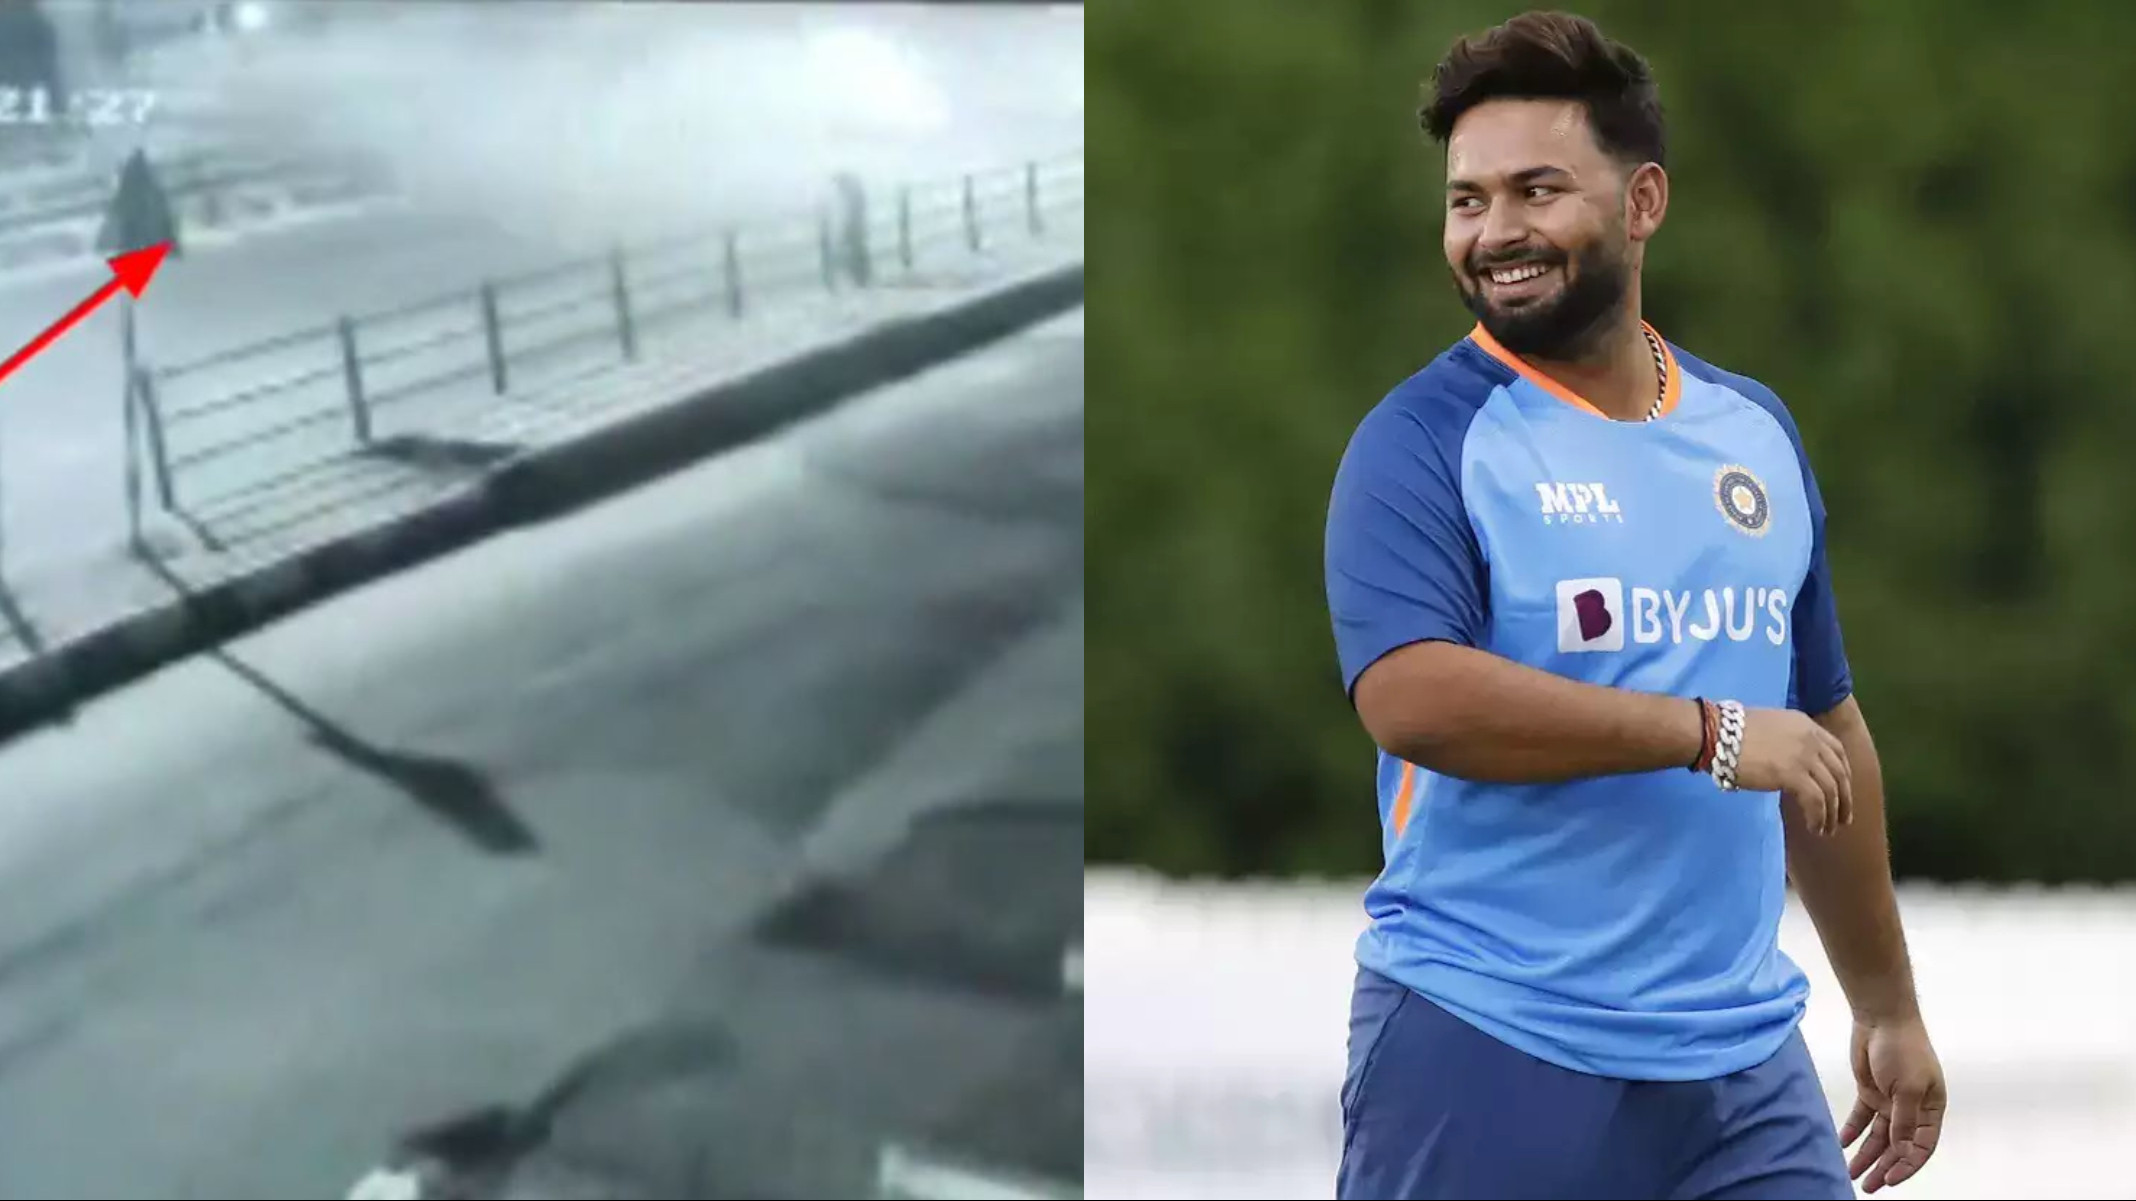 WATCH- Rishabh Pant’s terrible car crash caught on CCTV; cricketer suffers injuries to head, back and knee